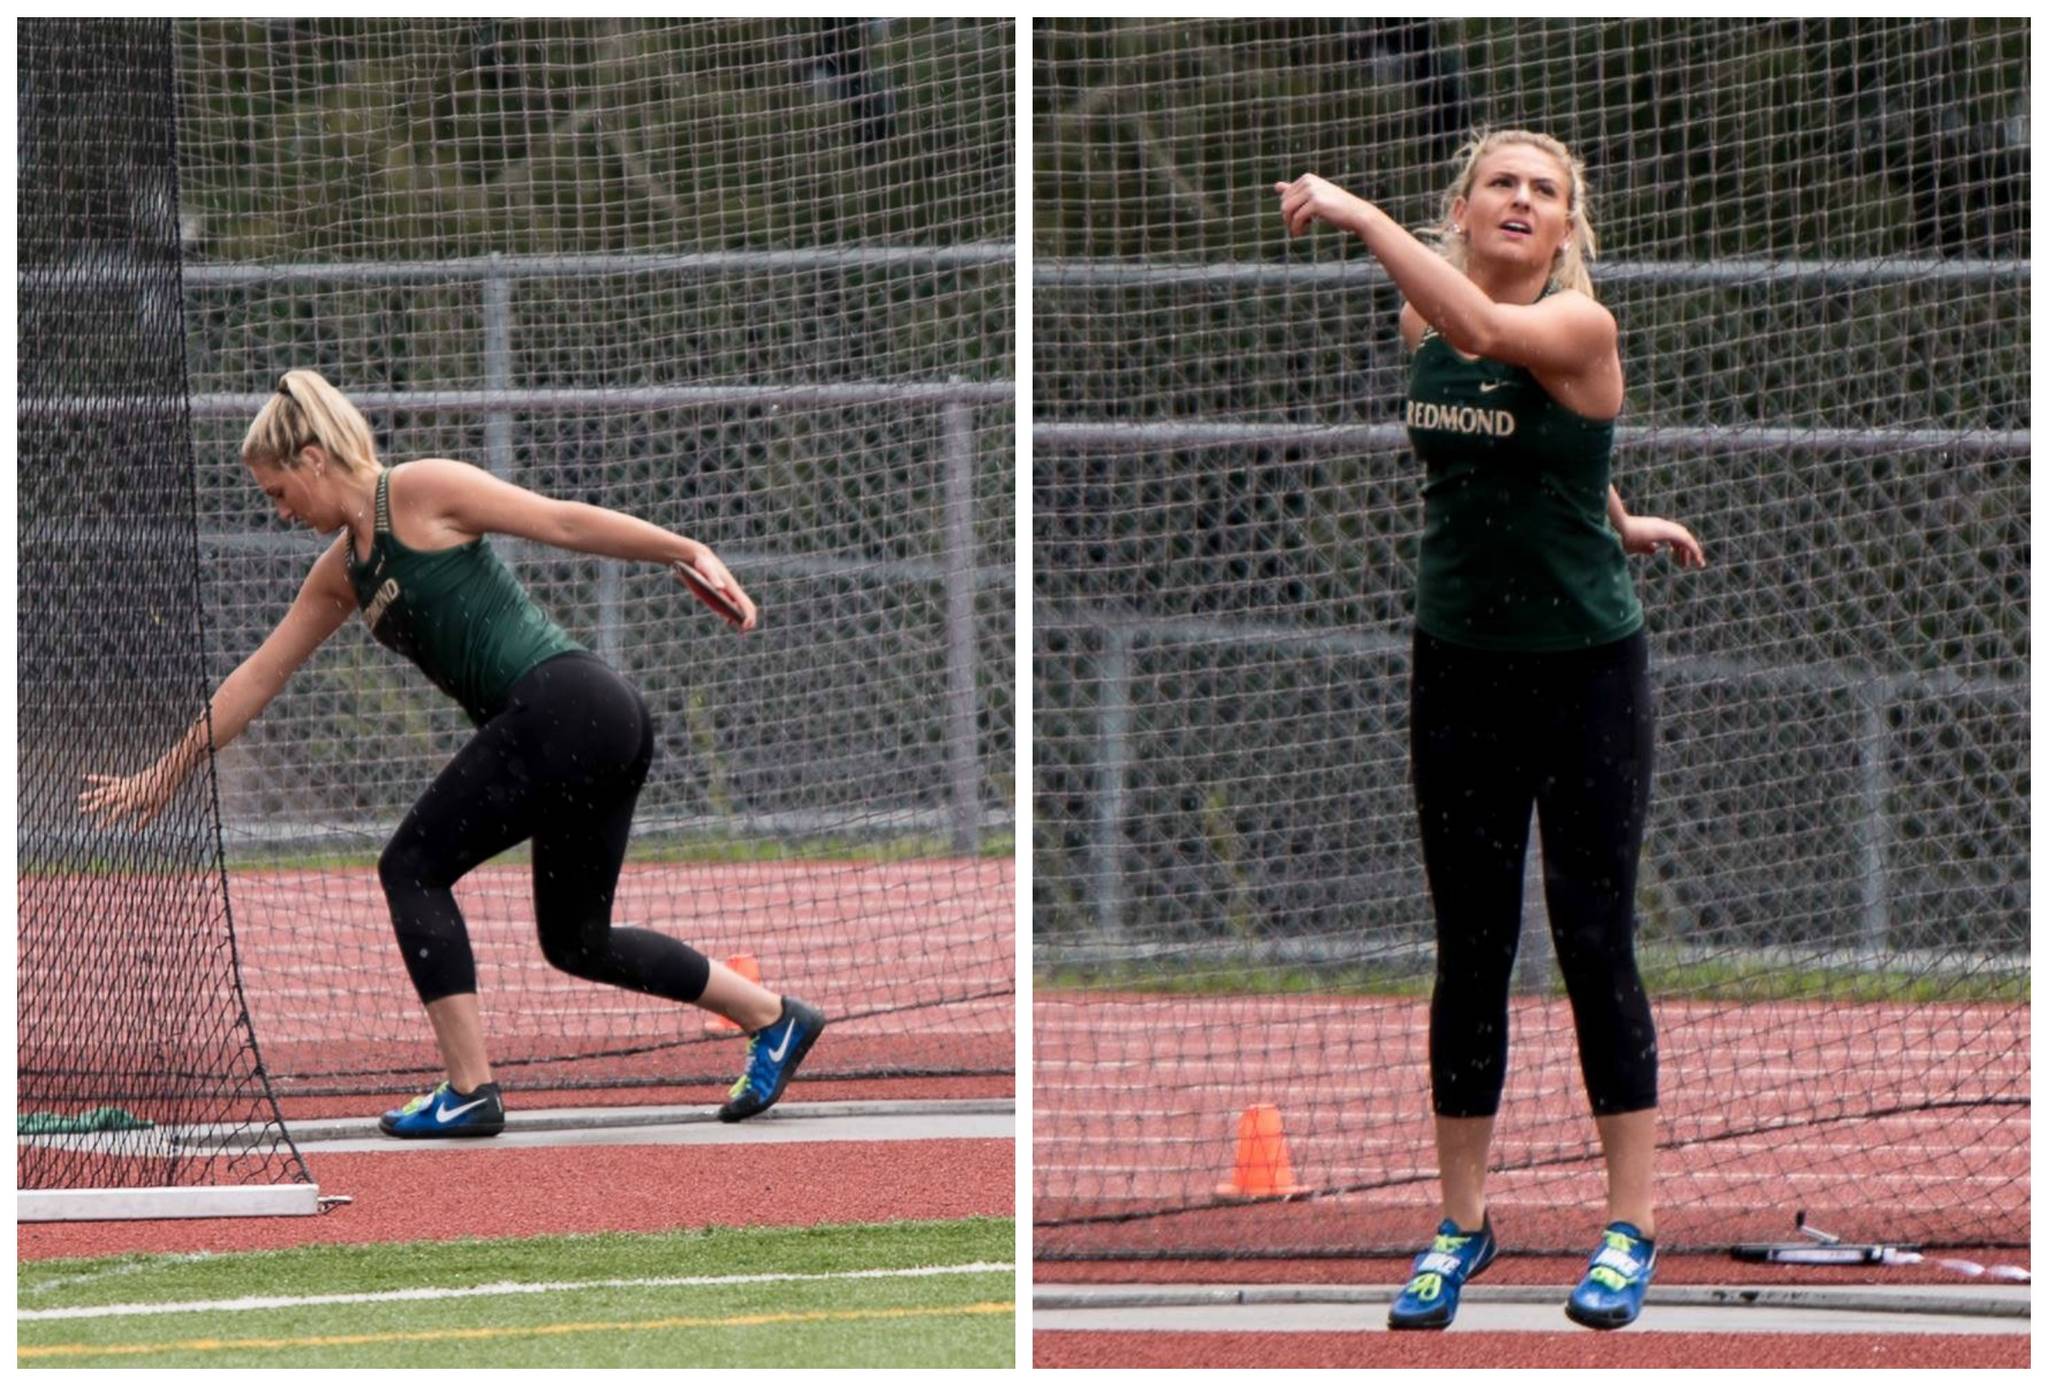 Redmond’s Kaitlyn Hartman competes in the discus at districts. Photos courtesy of Stuart Lui